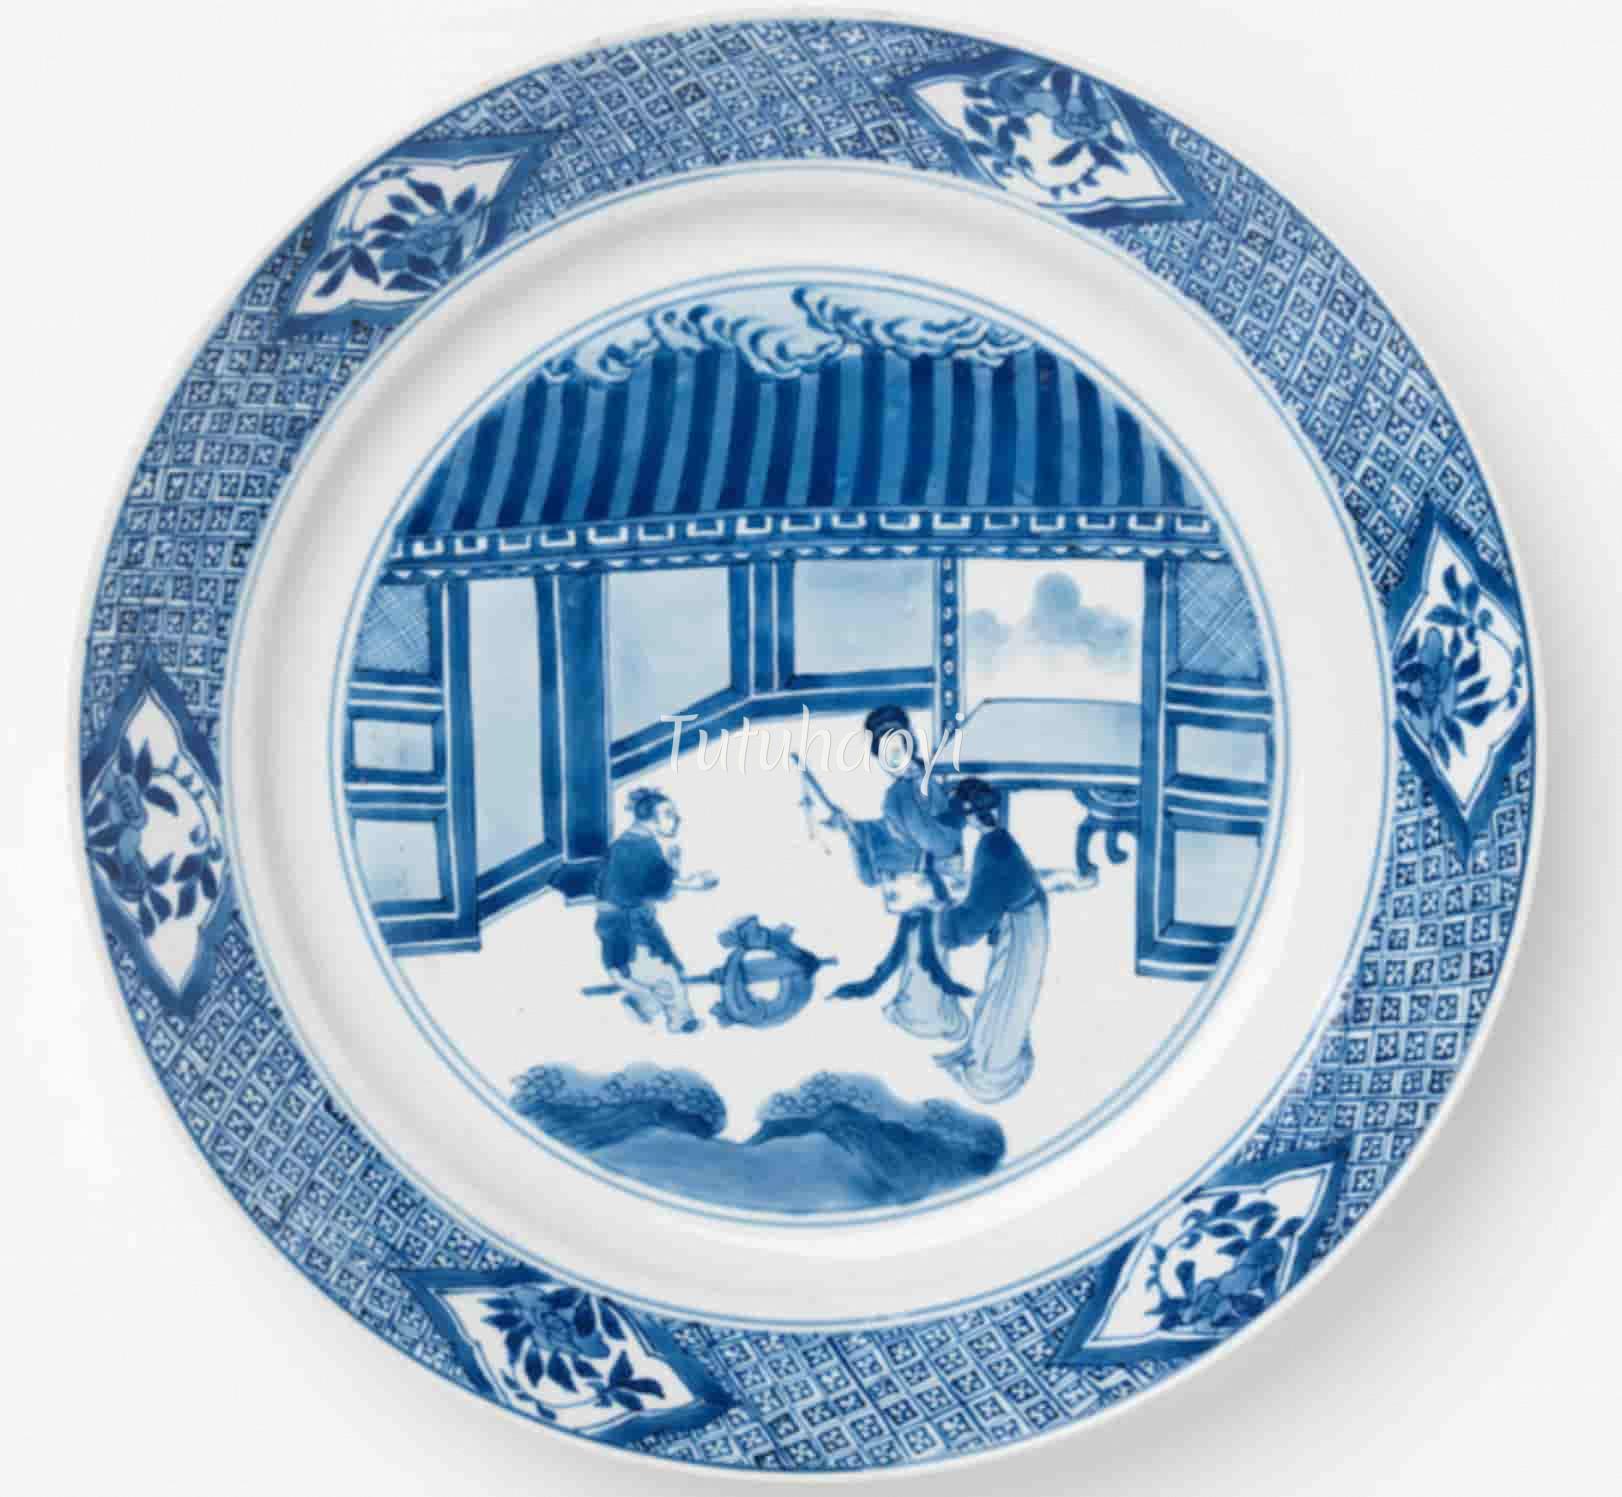 Kangxi plate depicting a scene in the Romance of the Western Chamber